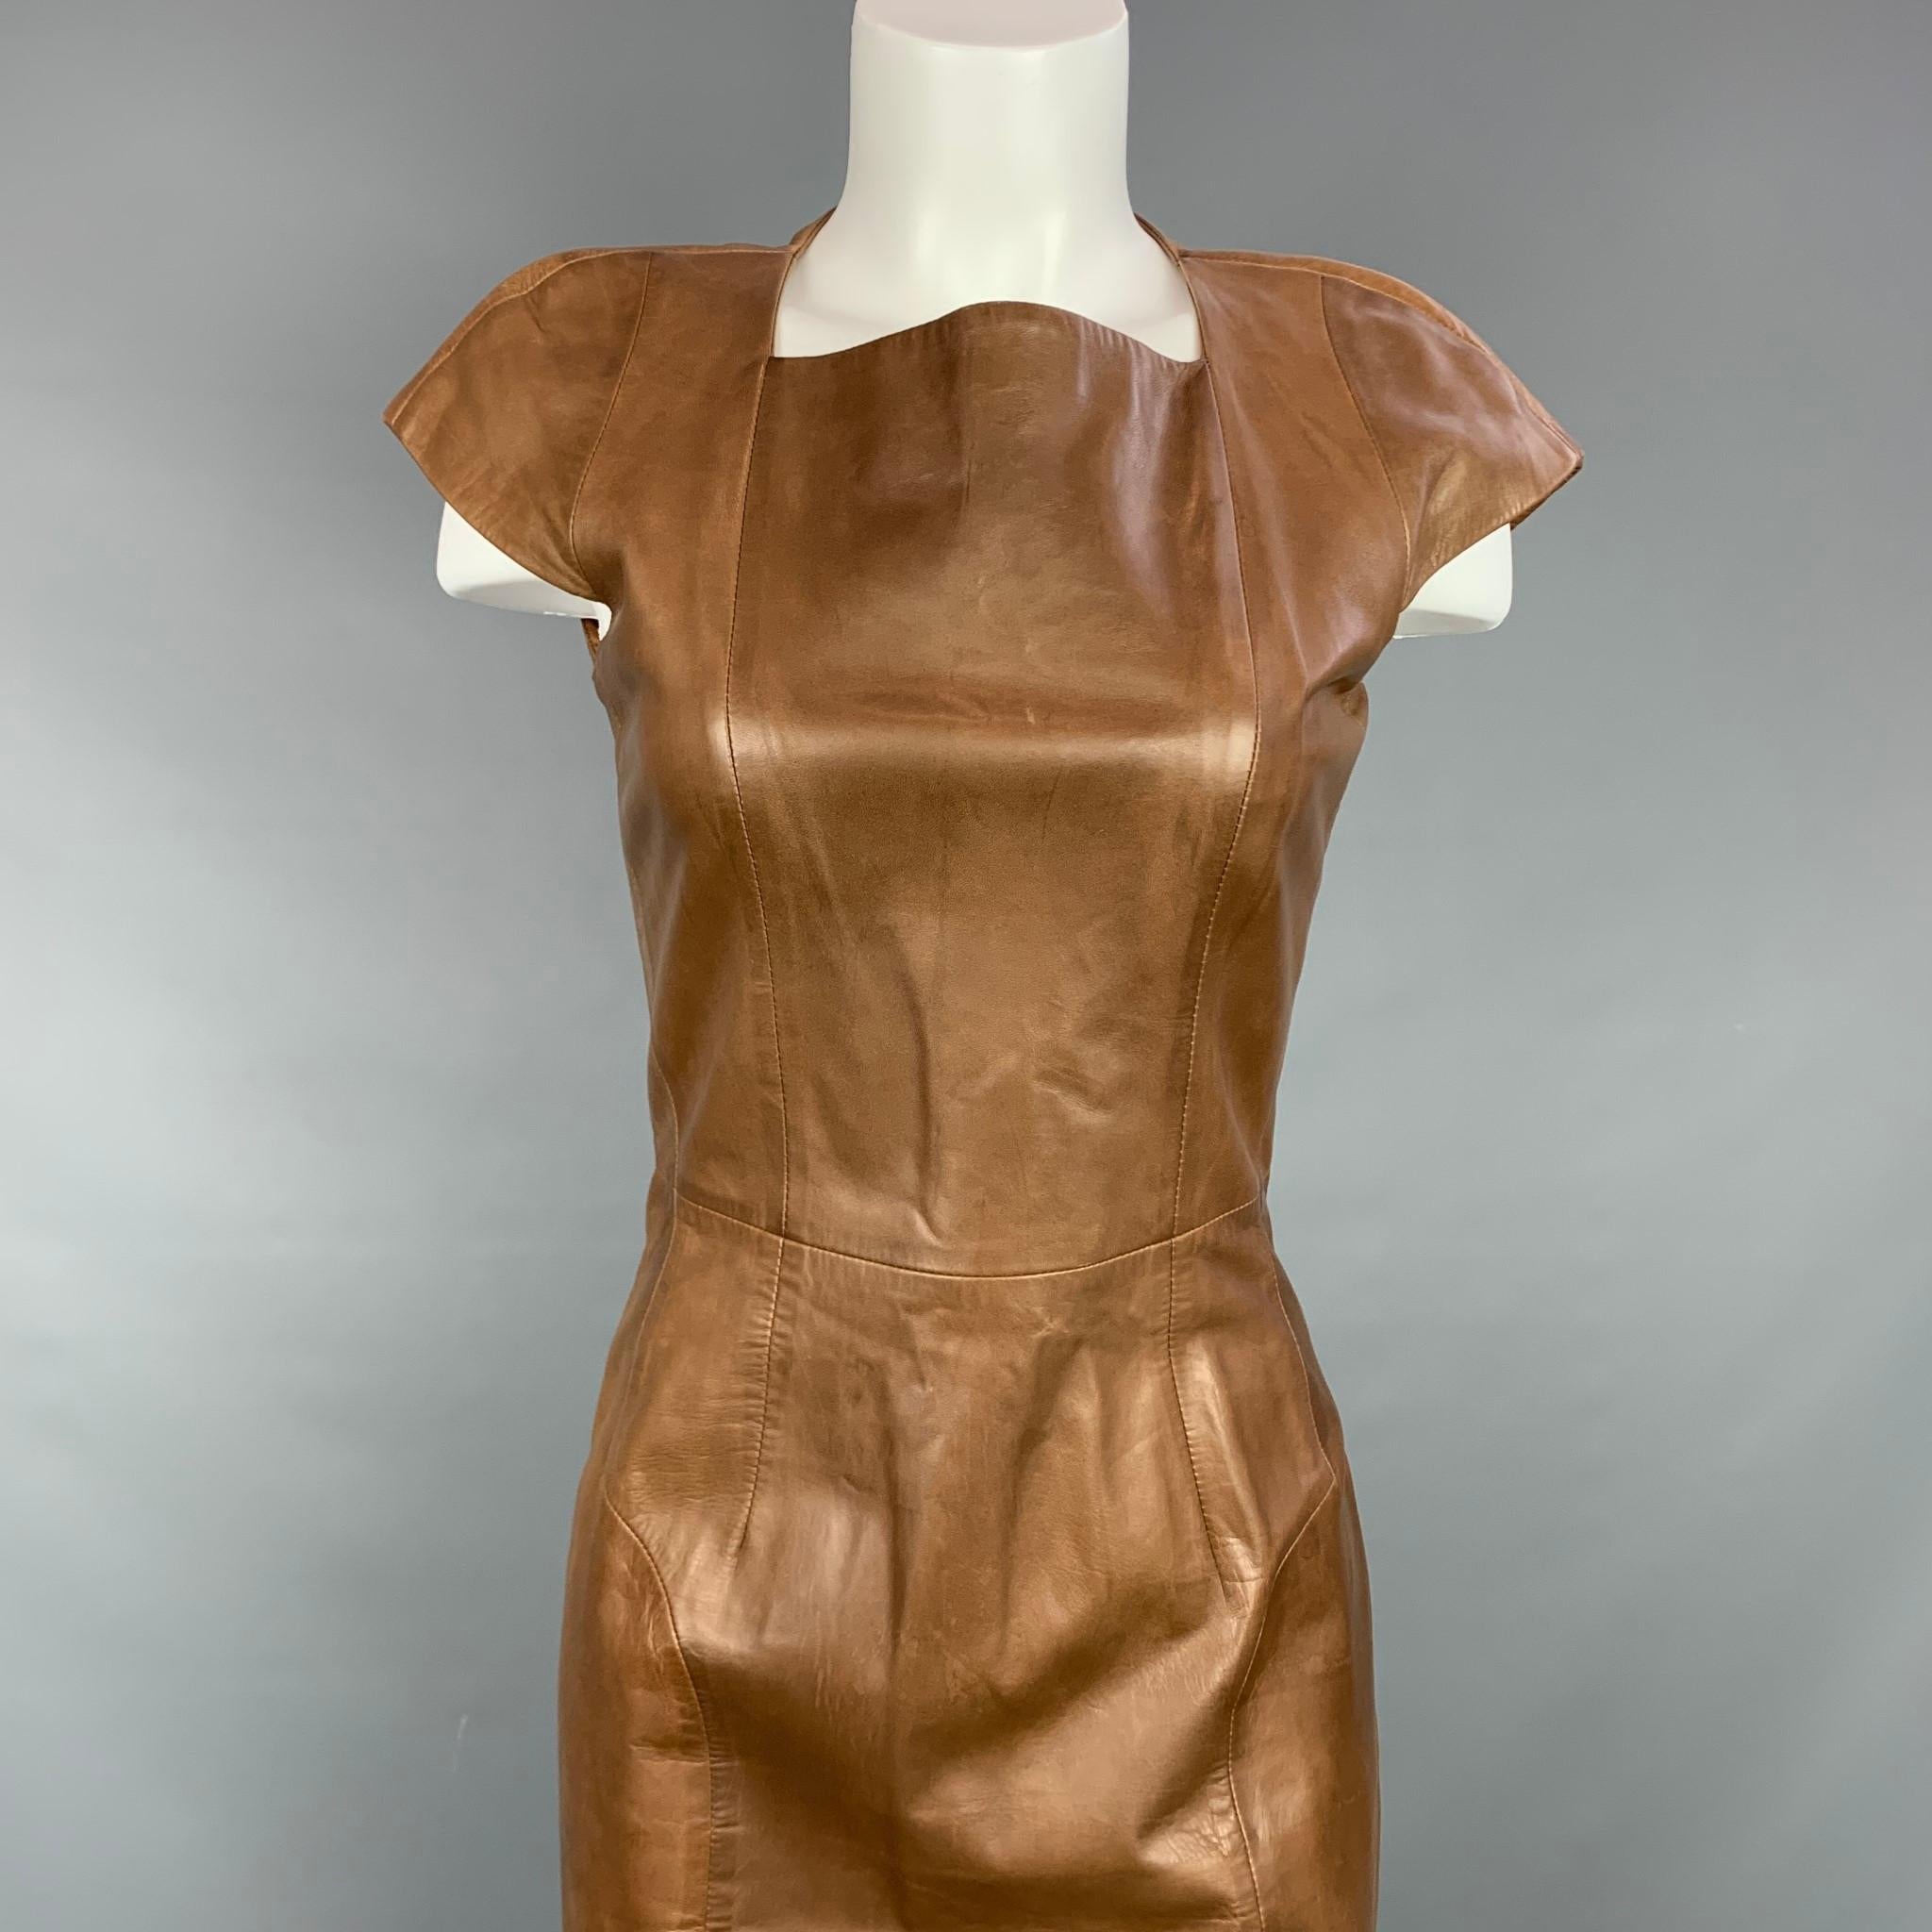 YVES SAINT LAURENT dress comes in a tan leather with a full liner featuring a shift style, cap sleeves, top stitching, and a back zip up closure. Made in Italy. 

Very Good Pre-Owned Condition.
Marked: 38
Original Retail Price: